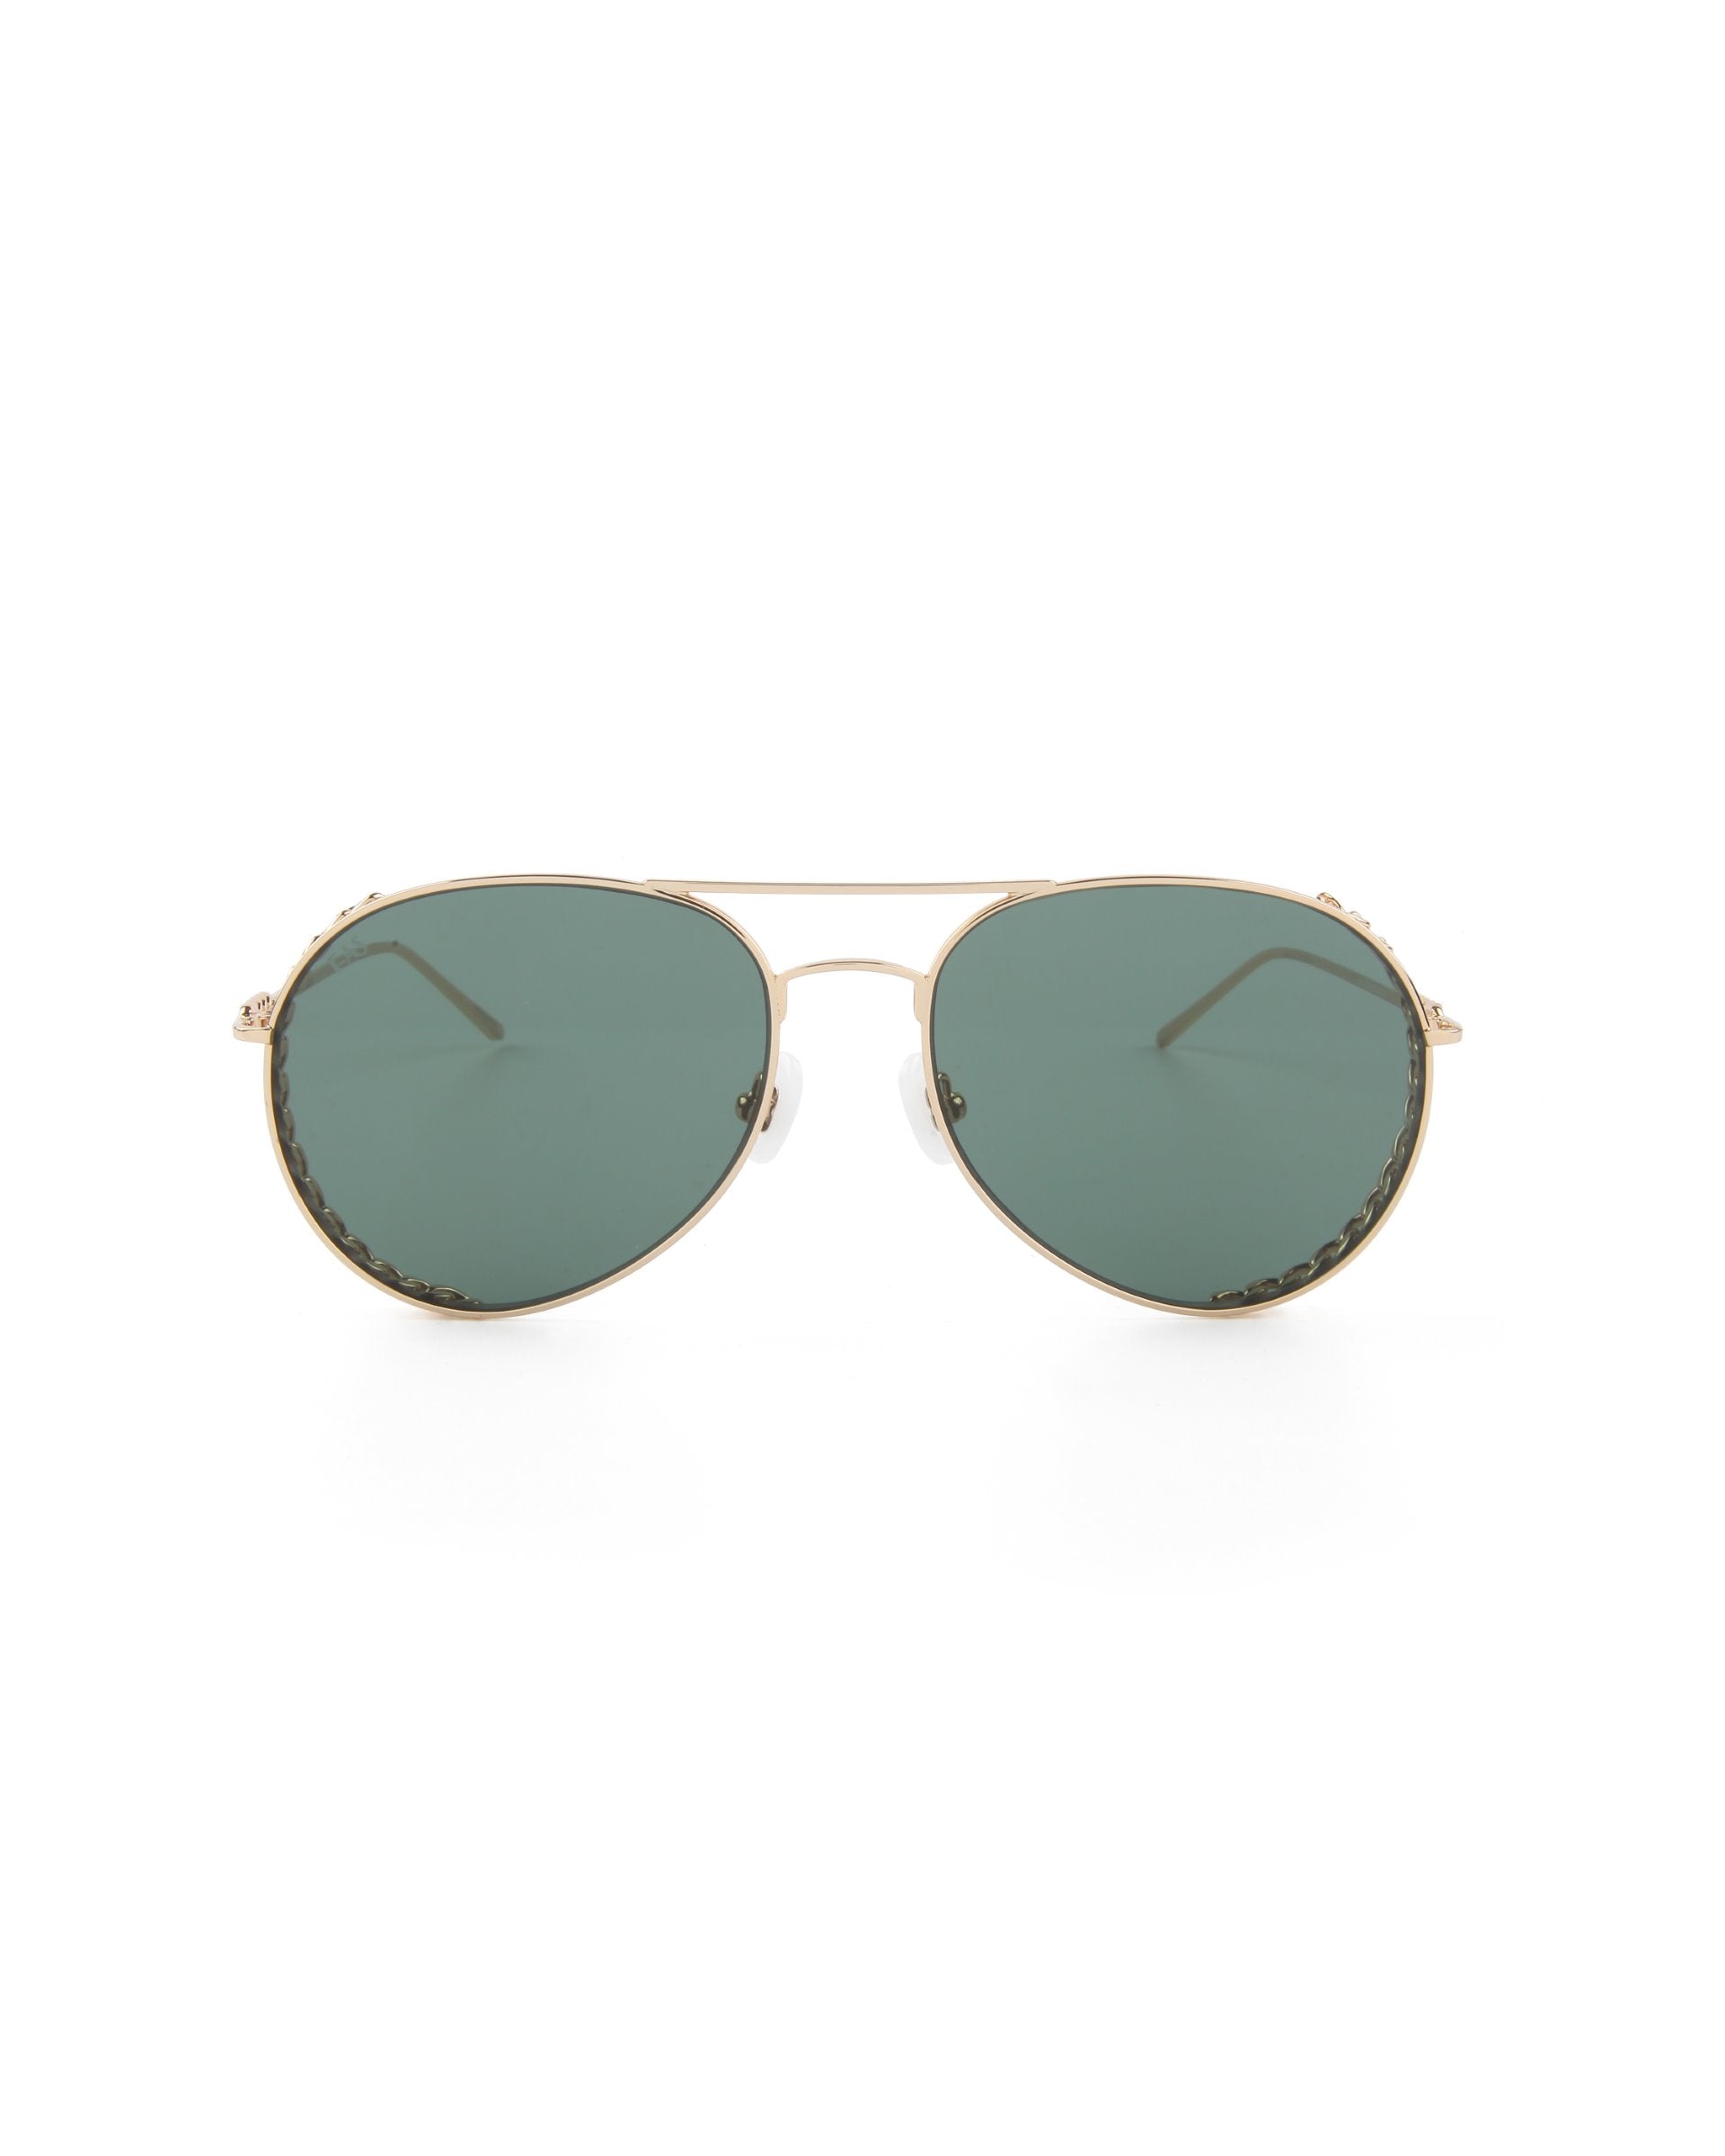 A pair of Links by For Art&#39;s Sake® with a thin gold-plated stainless steel frame and dark green Nylon lenses. The sunglasses feature a double bridge design and adjustable nose pads. The temples are gold with curved ends for a secure fit, while the large, slightly rounded lenses complete the classic look.